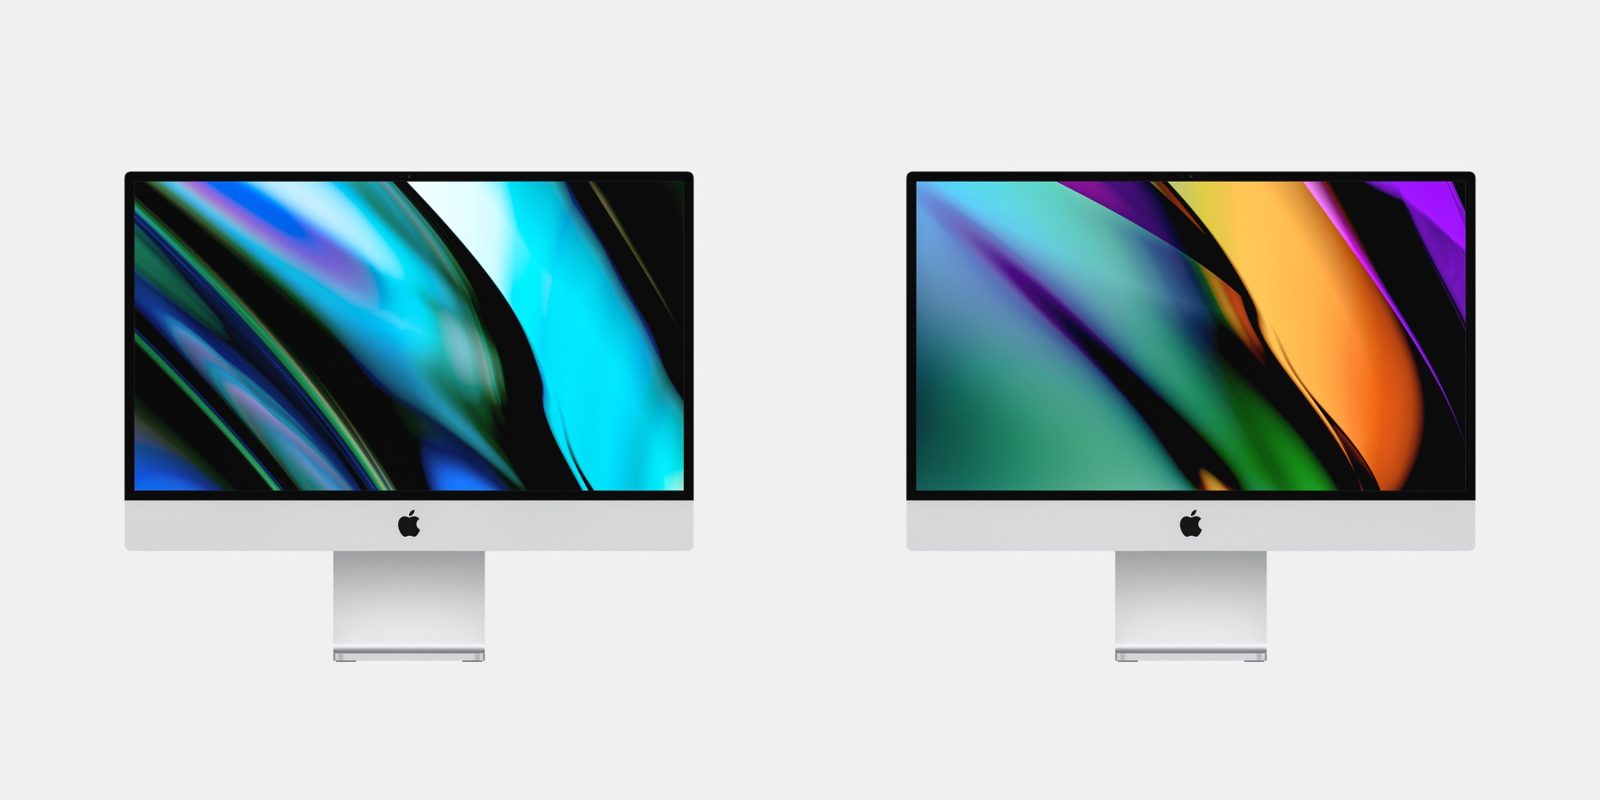 Will you buy an updated 23-inch iMac? Poll - 9to5Mac